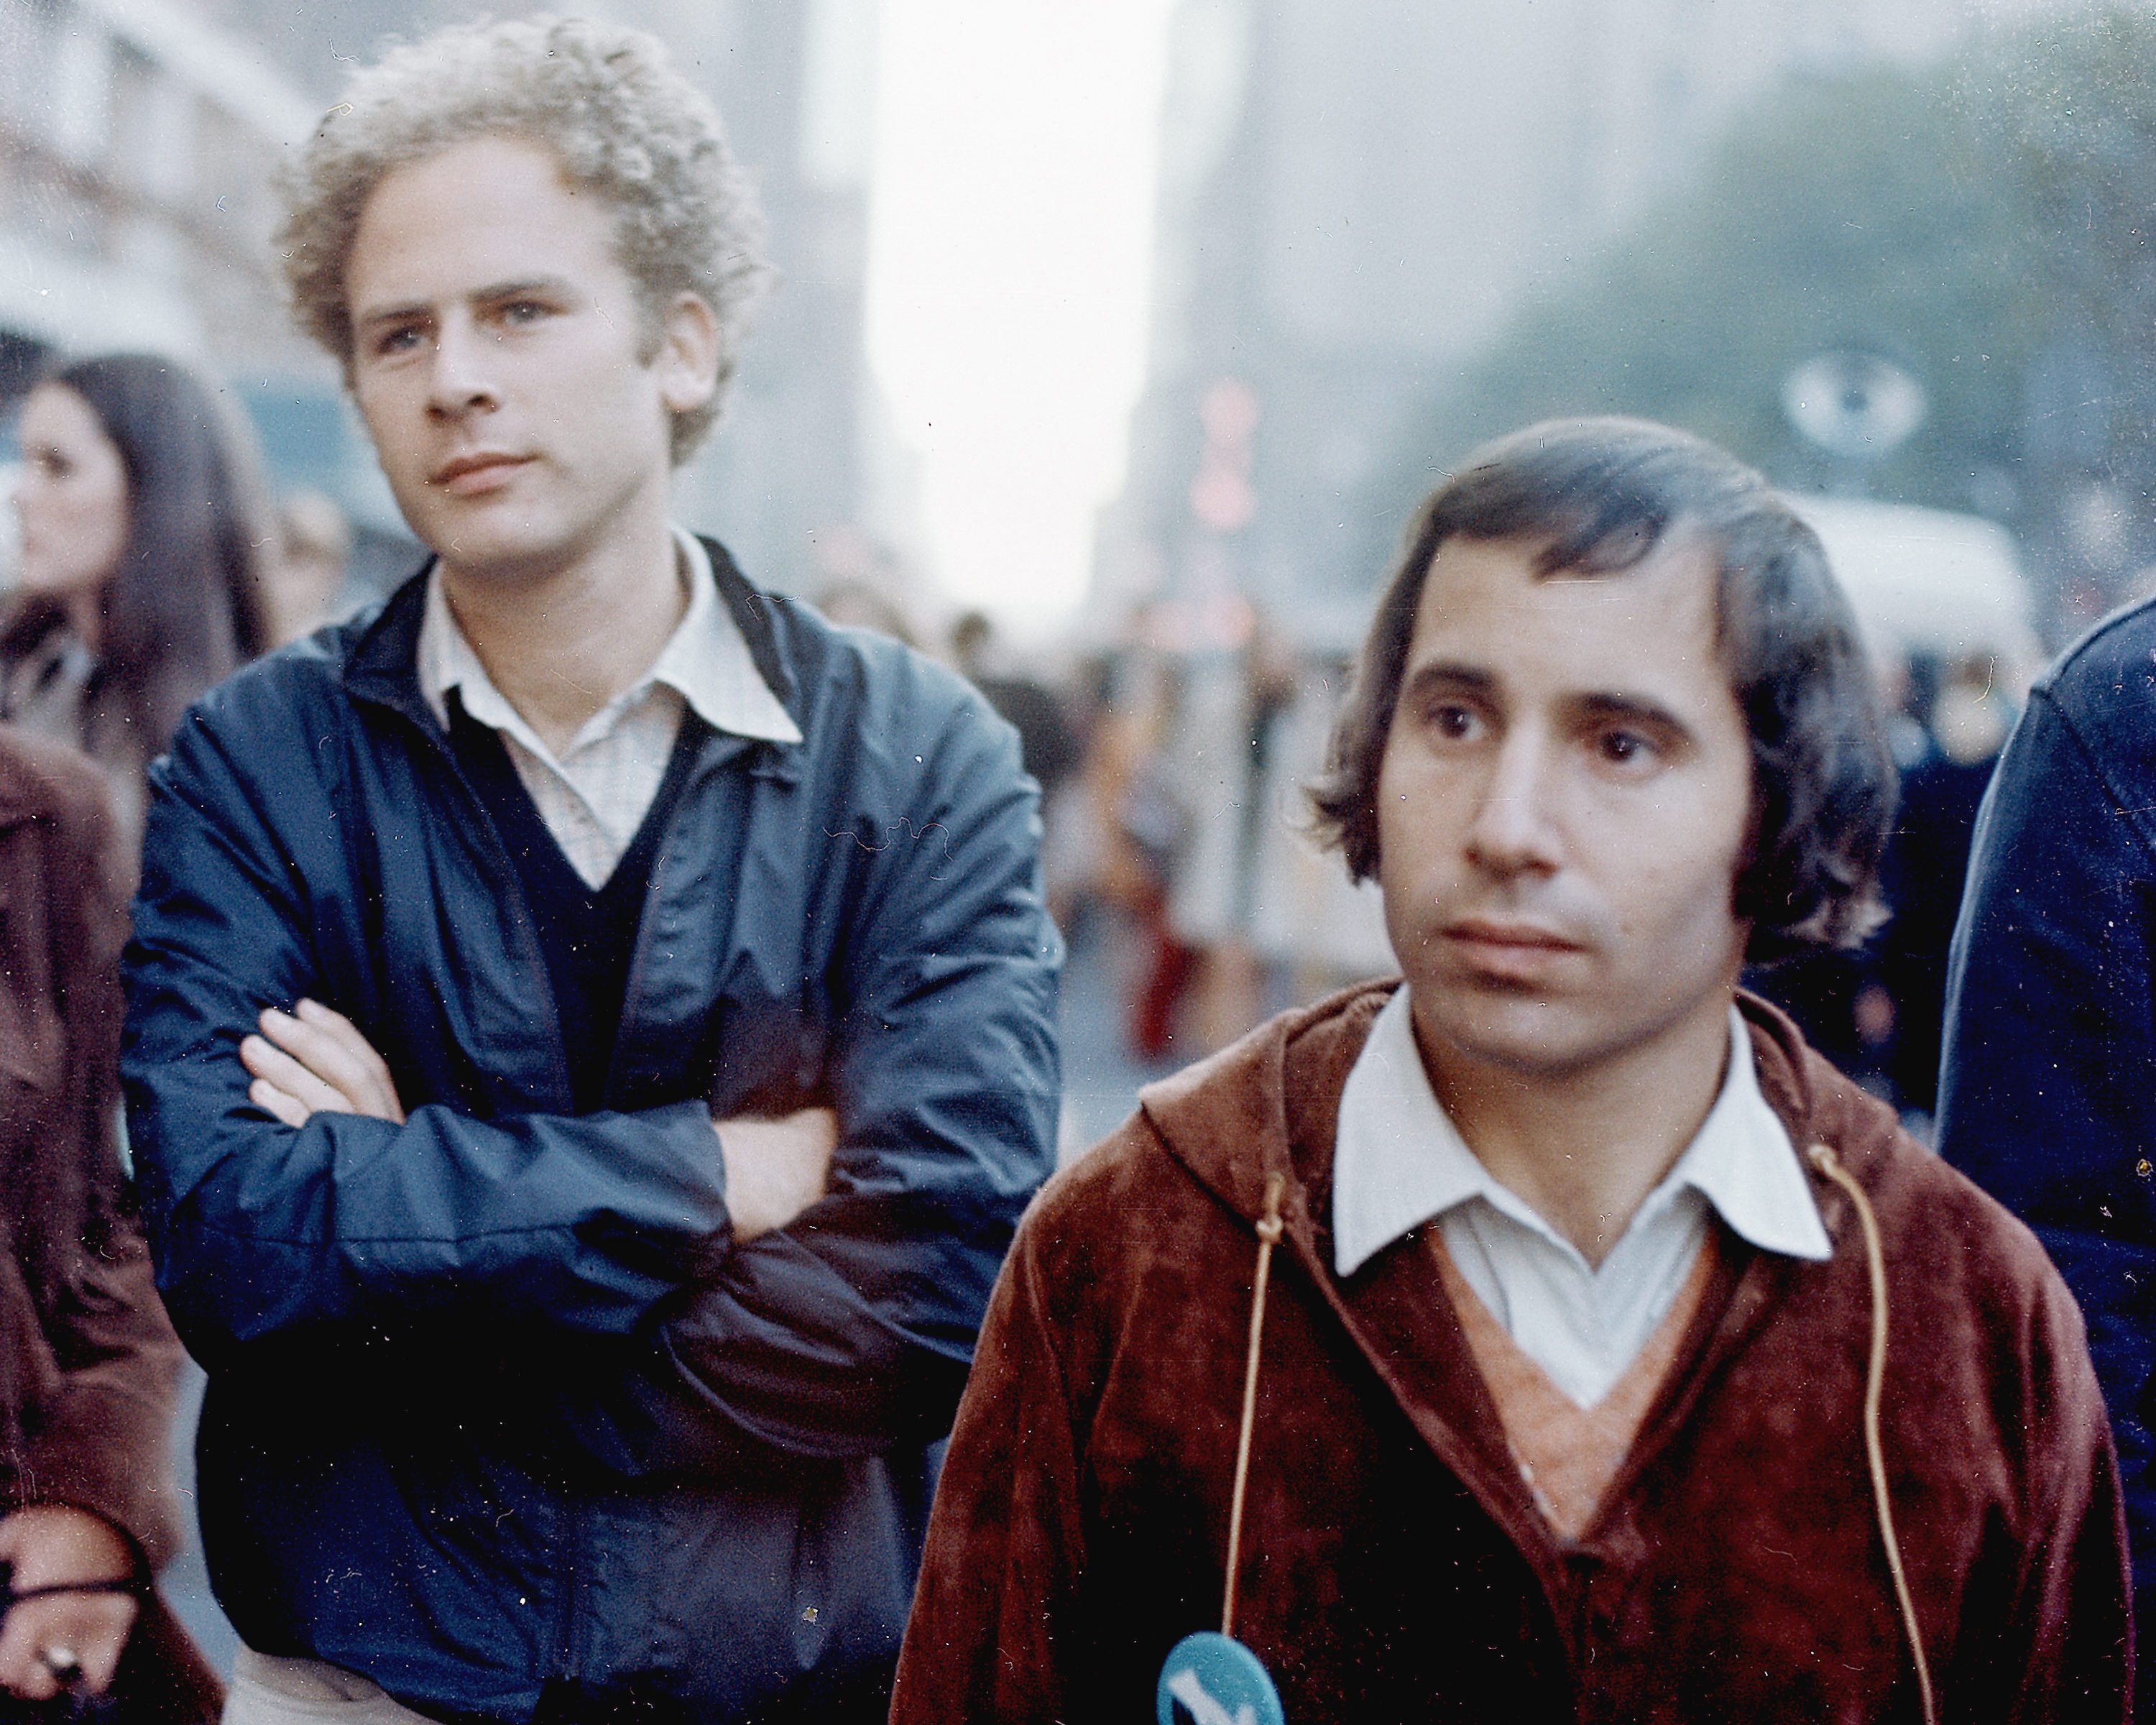 Art Garfunkel and Paul Simon stand during the filming of "Songs of America," which aired on November 30, 1969. | Source: Getty Images